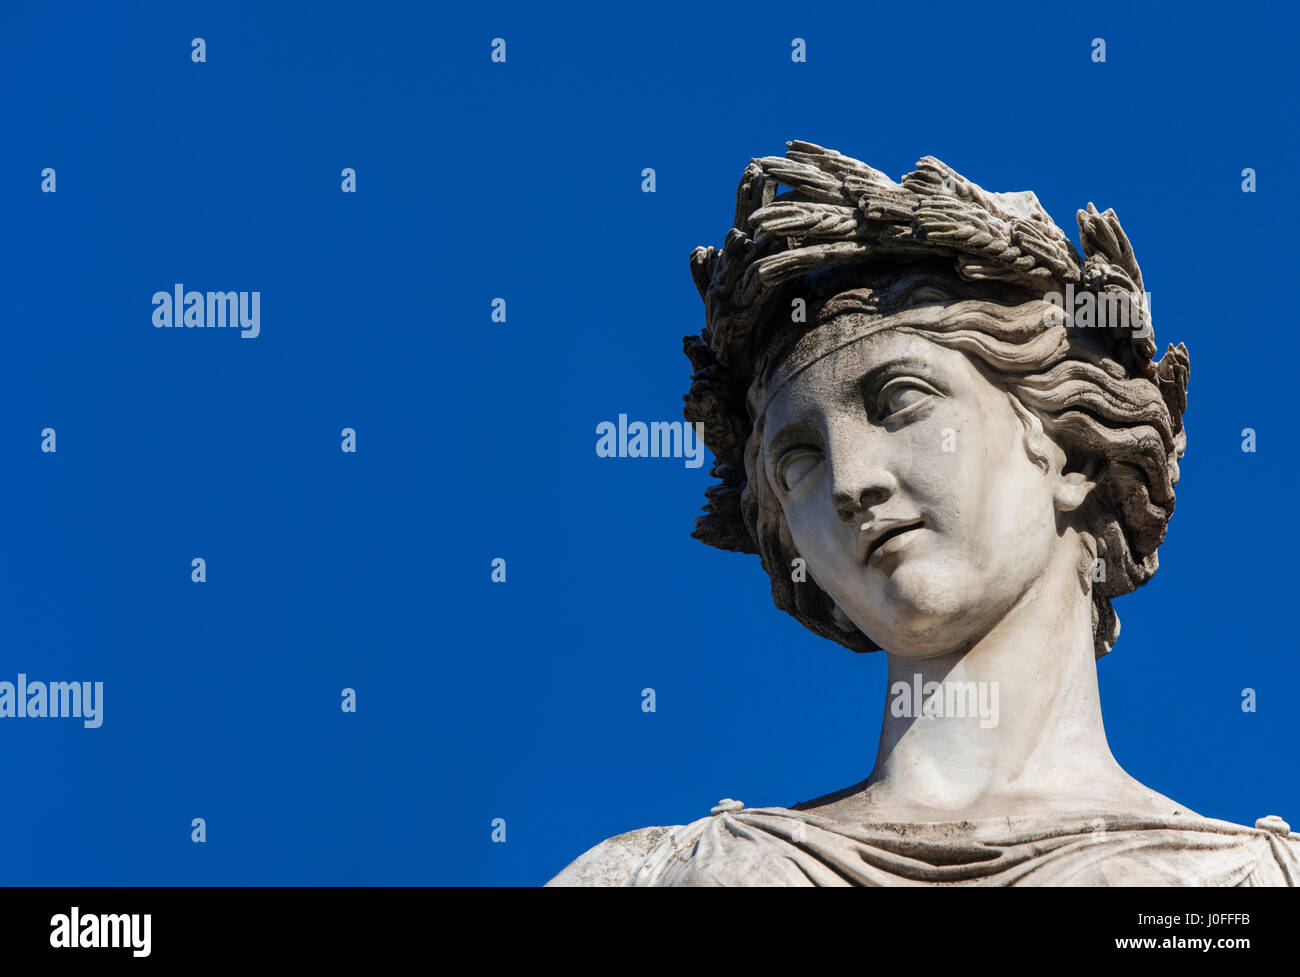 Ancient Roman or Greek neoclassical statue in Rome (with copy space) Stock Photo